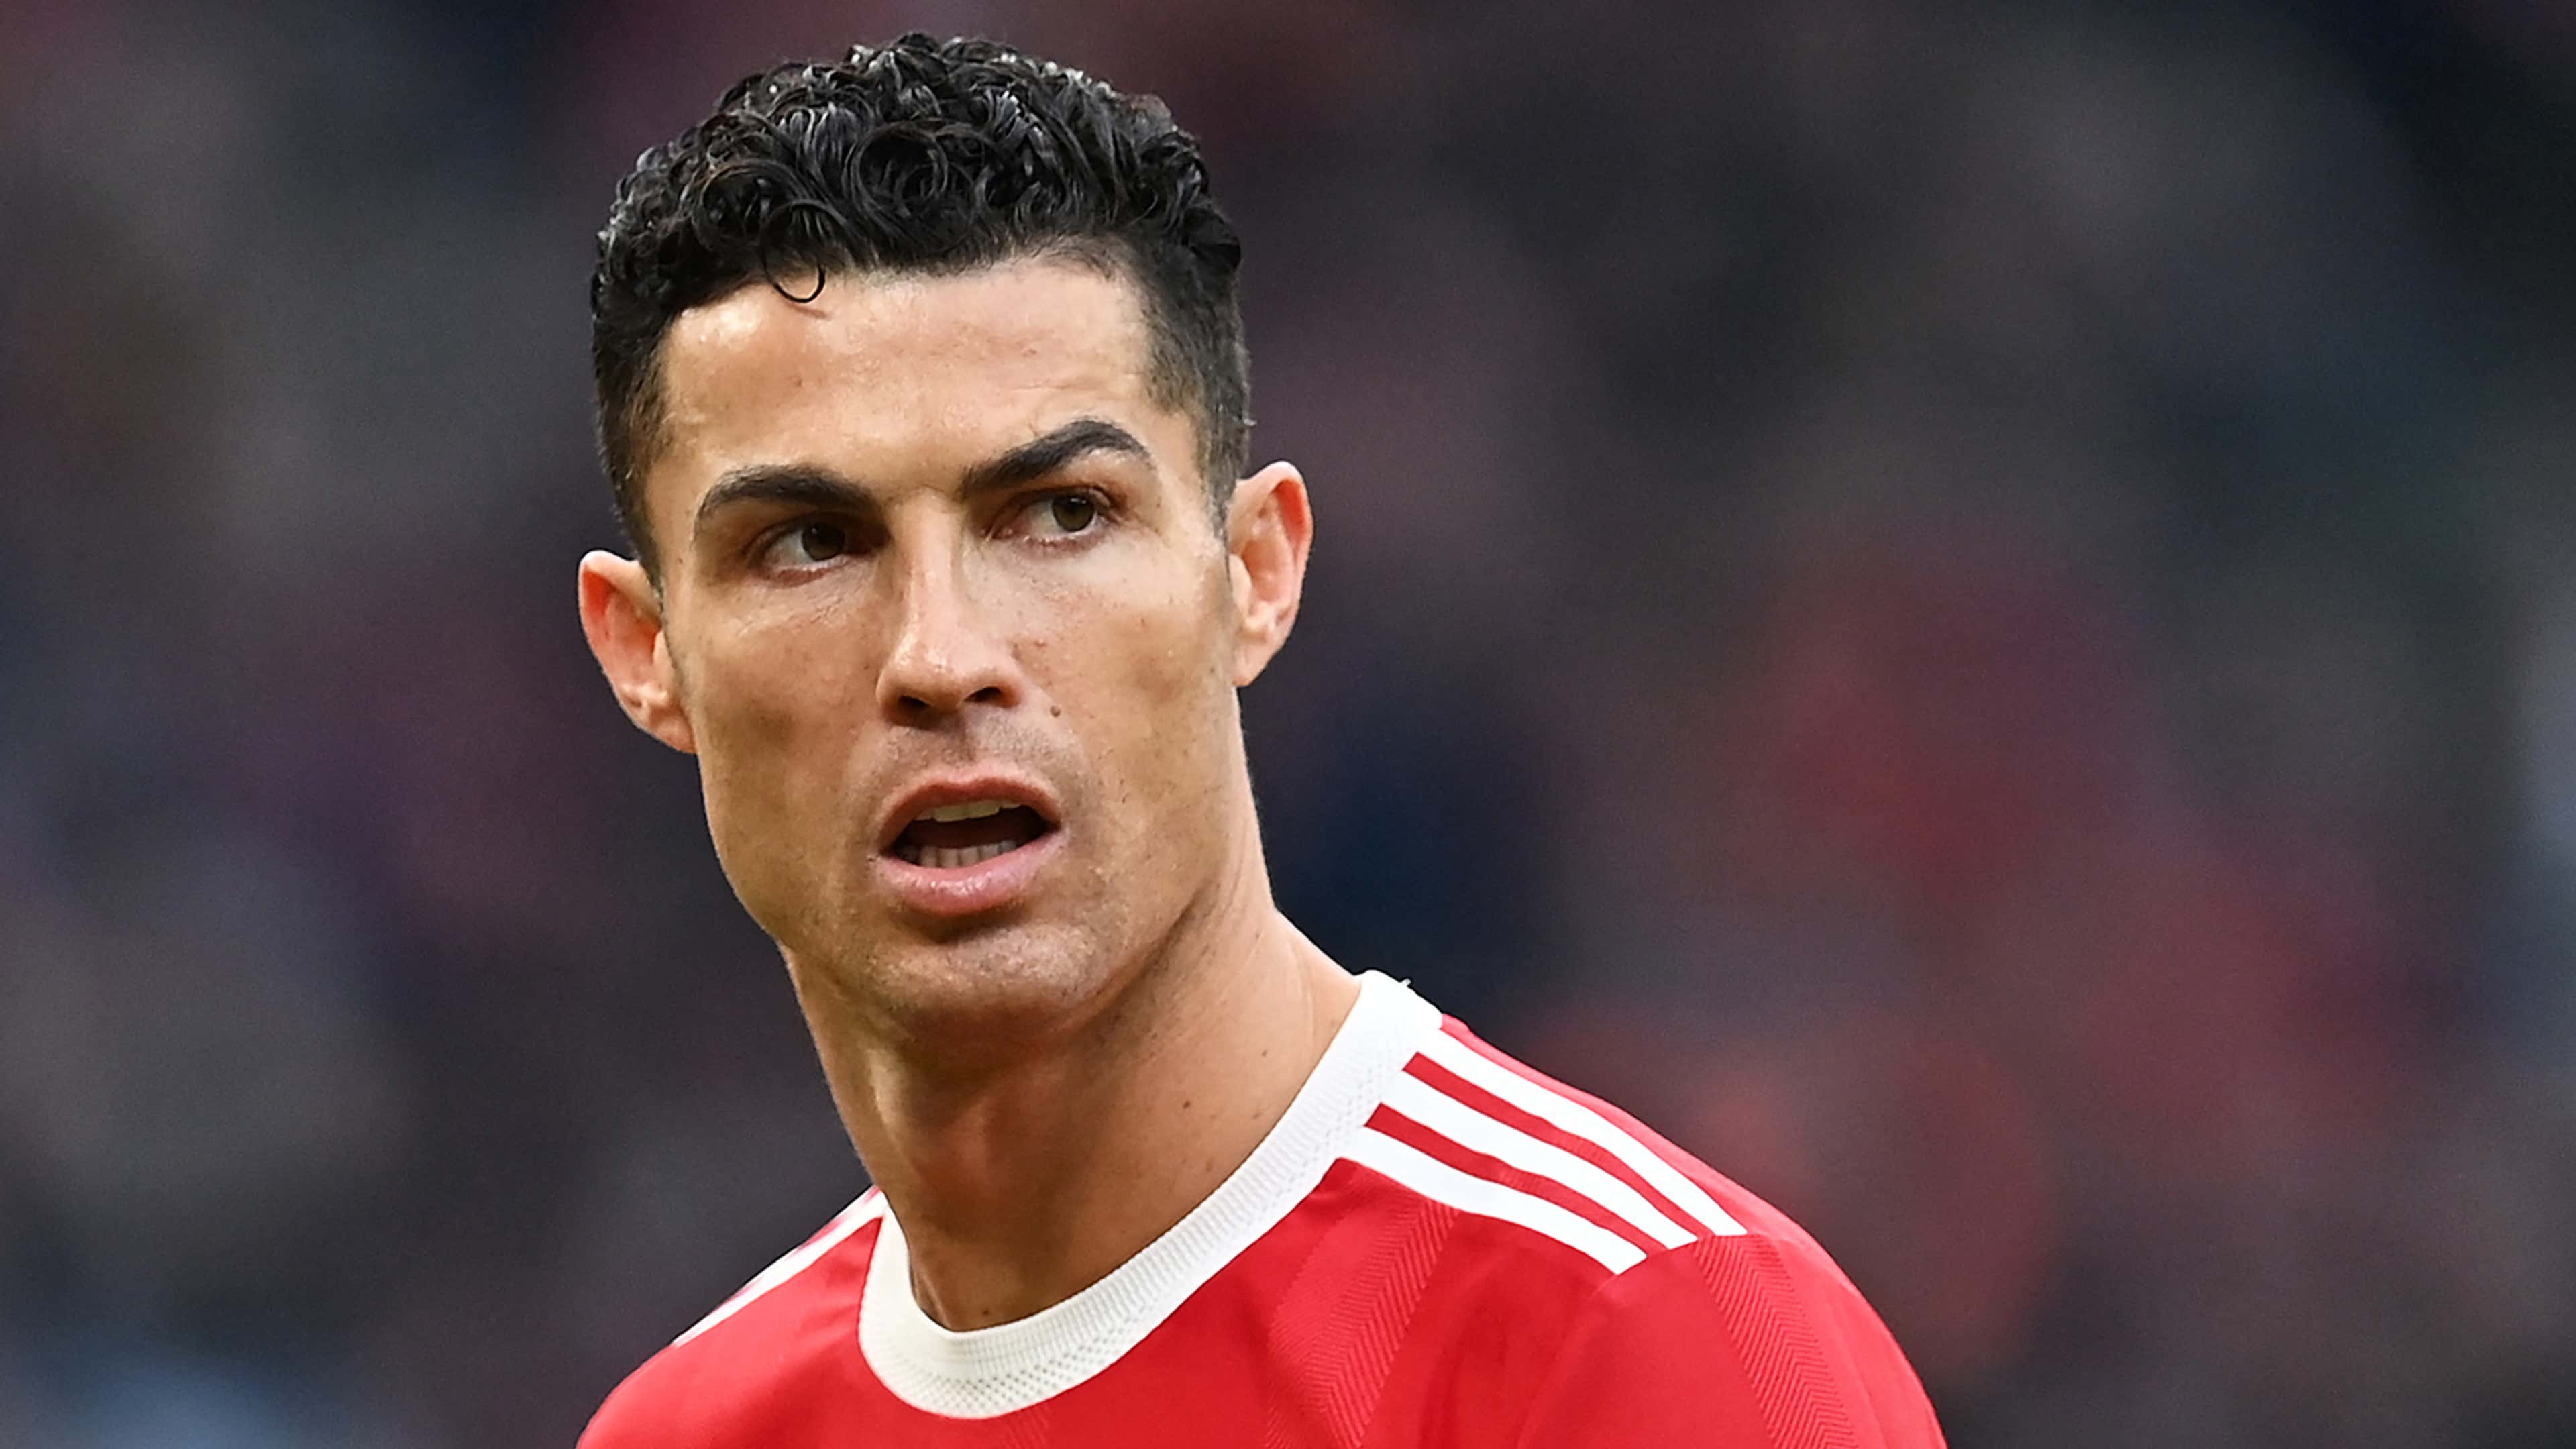 He's a guy that': Cristiano Ronaldo opens up about his long